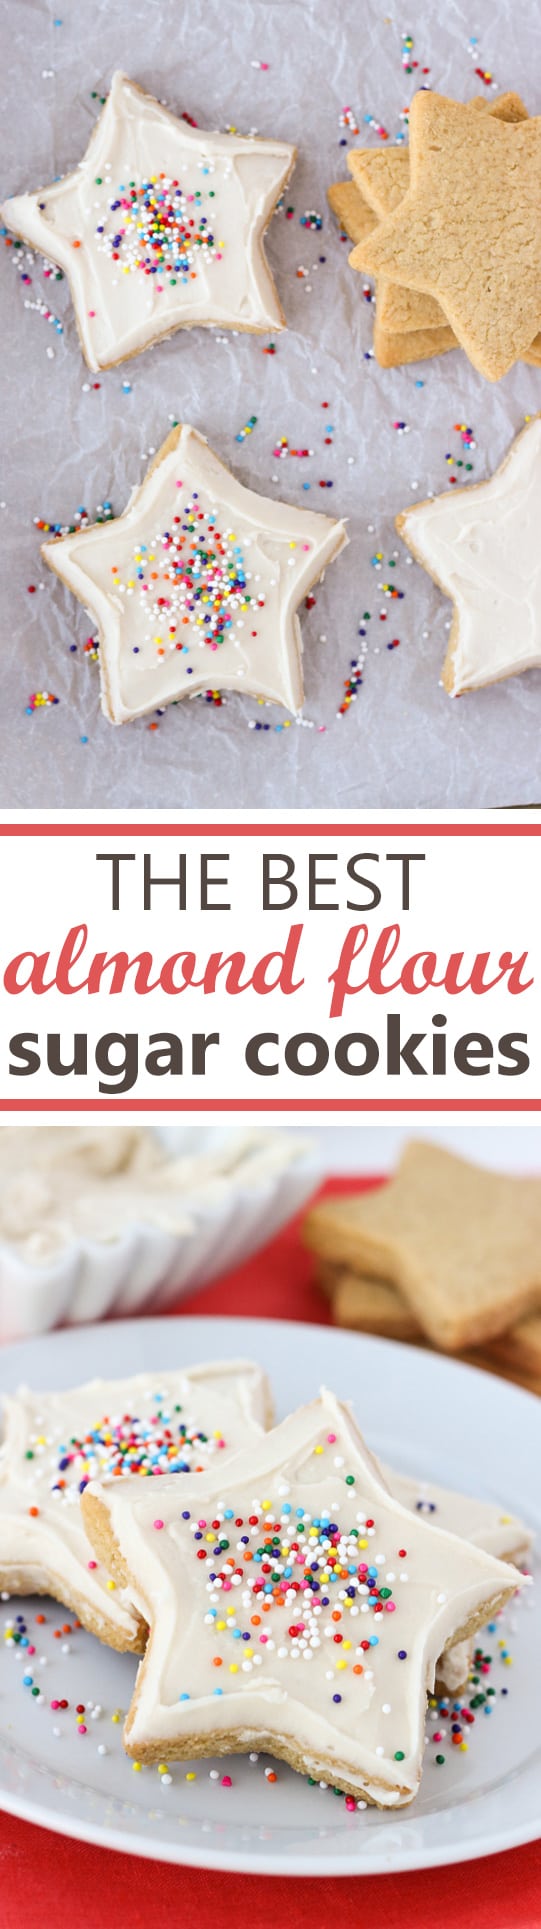 The Best Almond Flour Sugar Cookies! Soft in the middle and crispy on the edges. Easy to roll out and perfect for cut-outs!